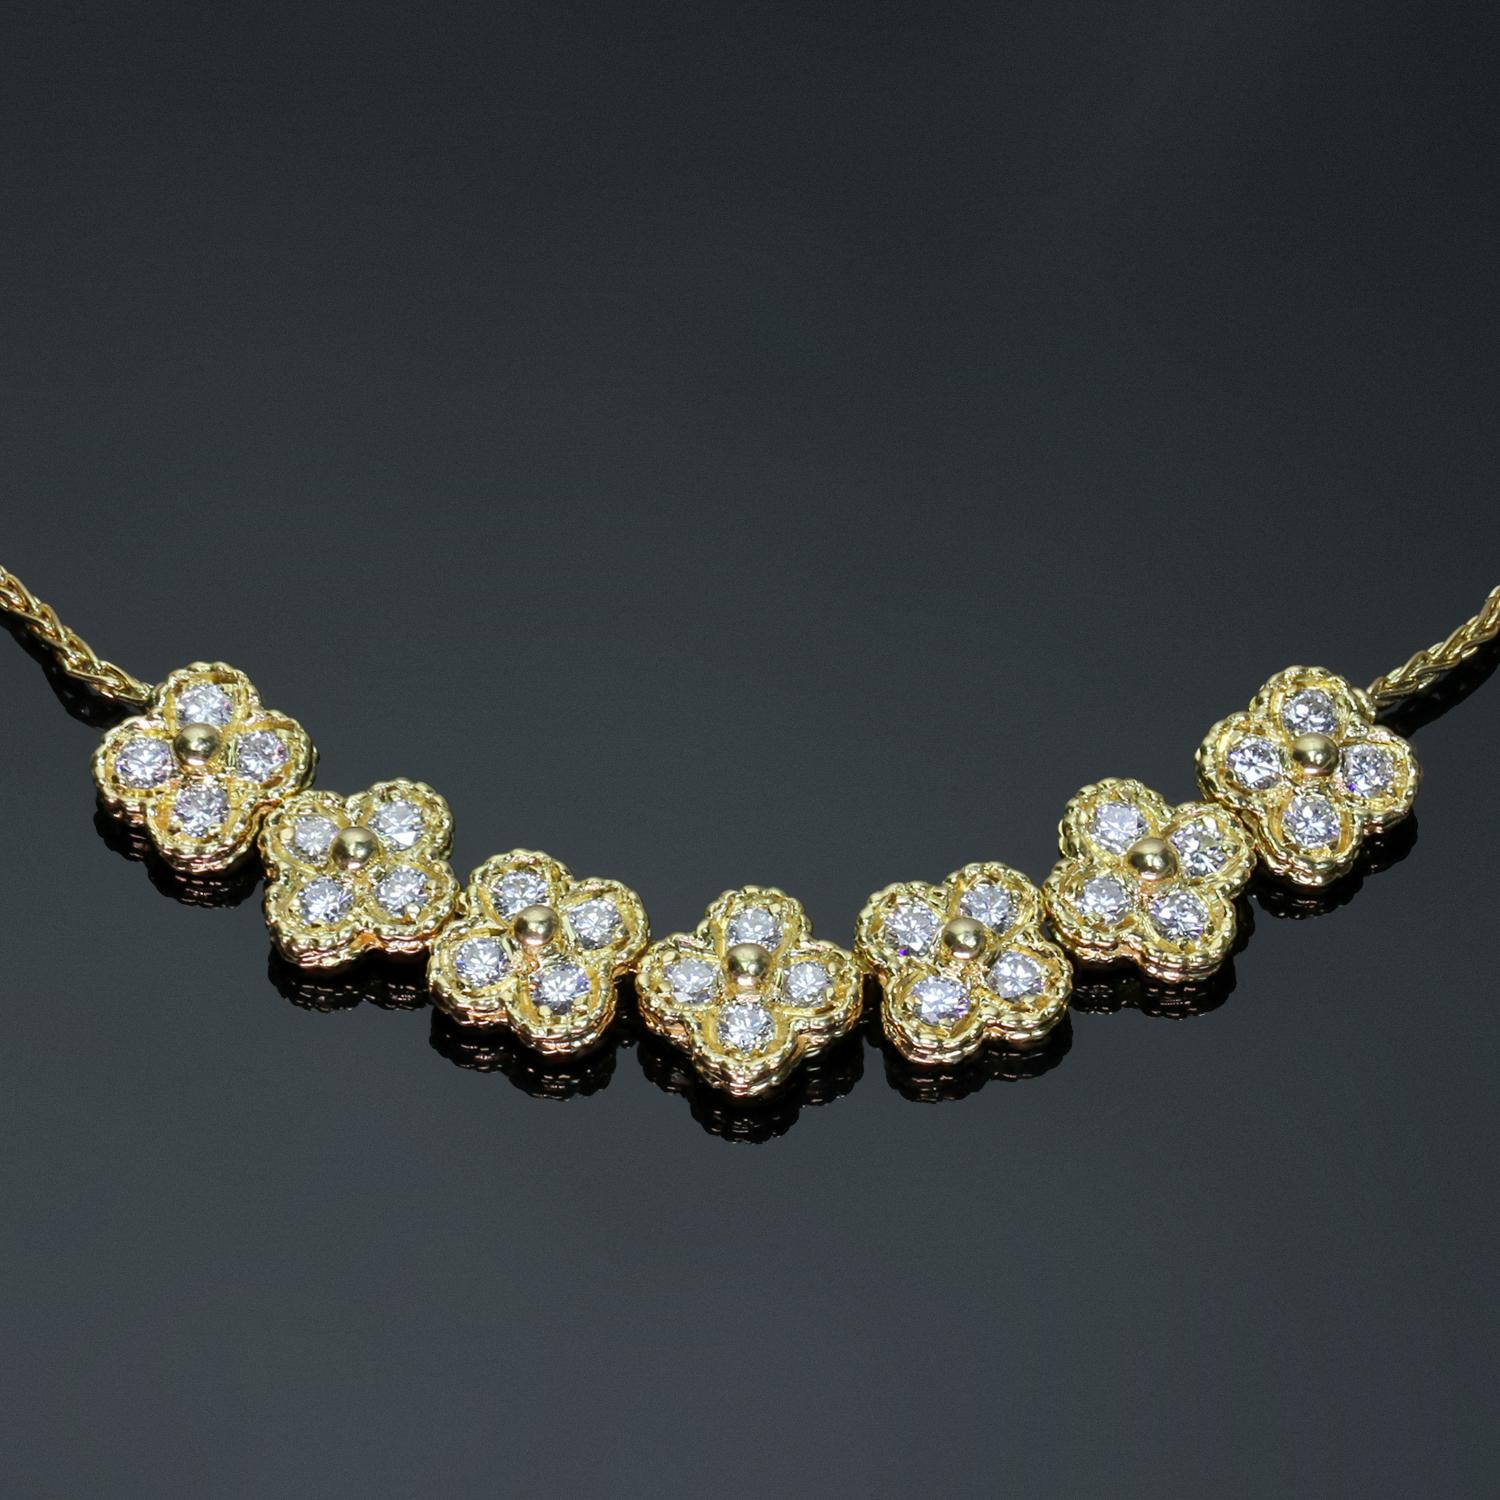 This exquisite Arno necklace from the Alhambra collection is crafted in 18k yellow gold and features a 5 flower design set with 28 brilliant-cut round diamonds of an estimated 1.68 carats. Made in France circa 2000. A timeless classic. Measurements: